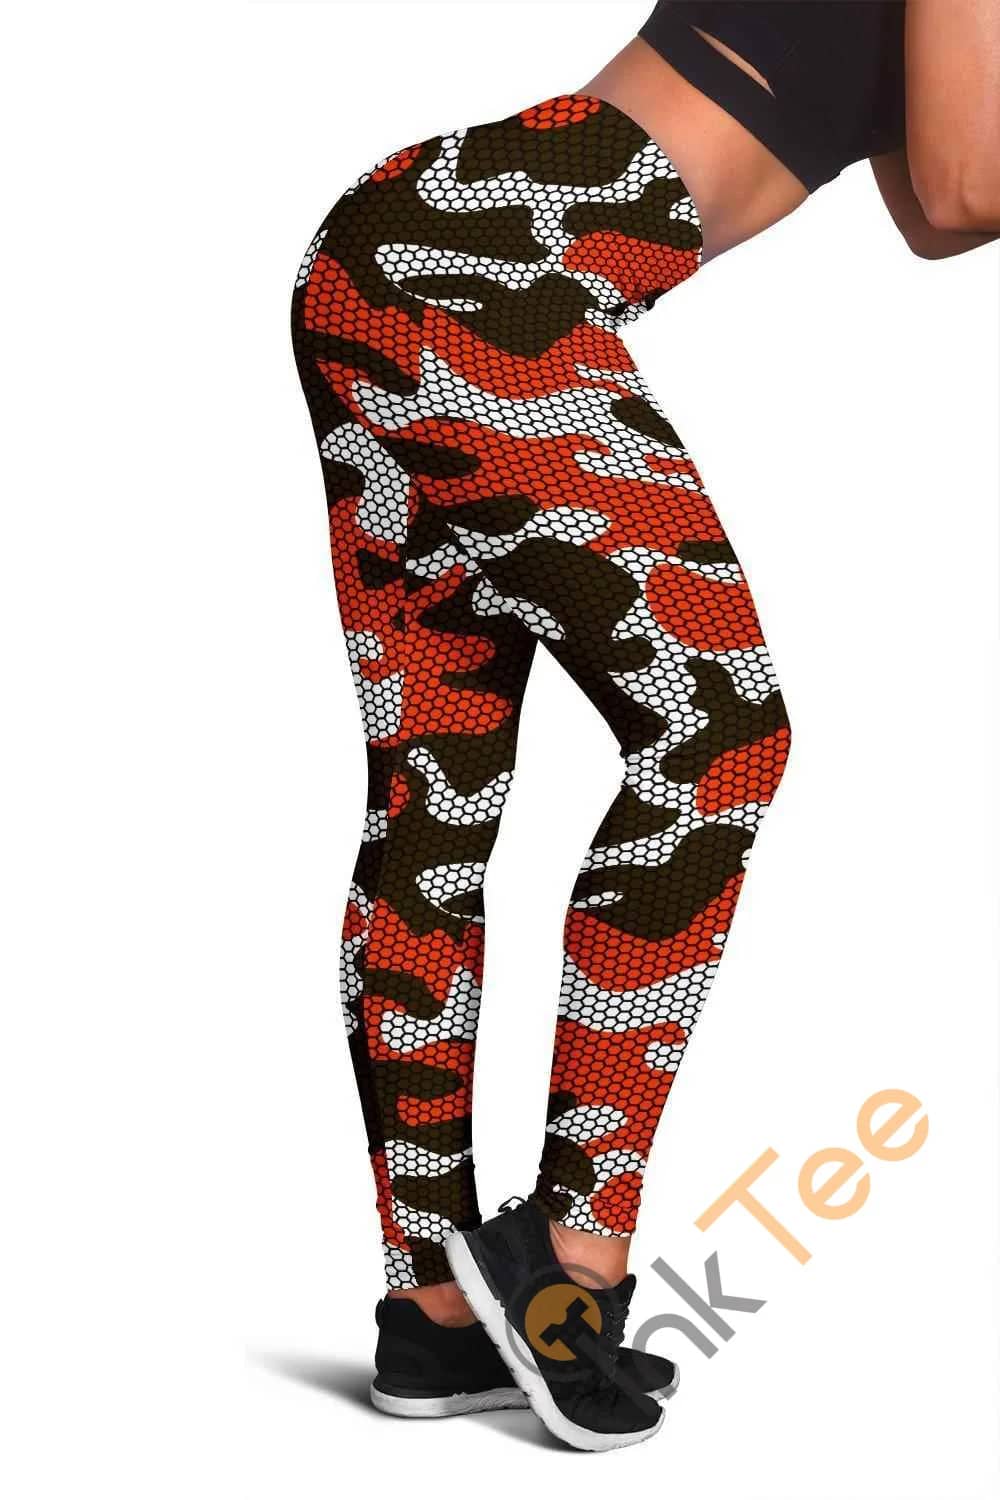 Cleveland Browns Inspired Hex Camo 3D All Over Print For Yoga Fitness Fashion Women's Leggings